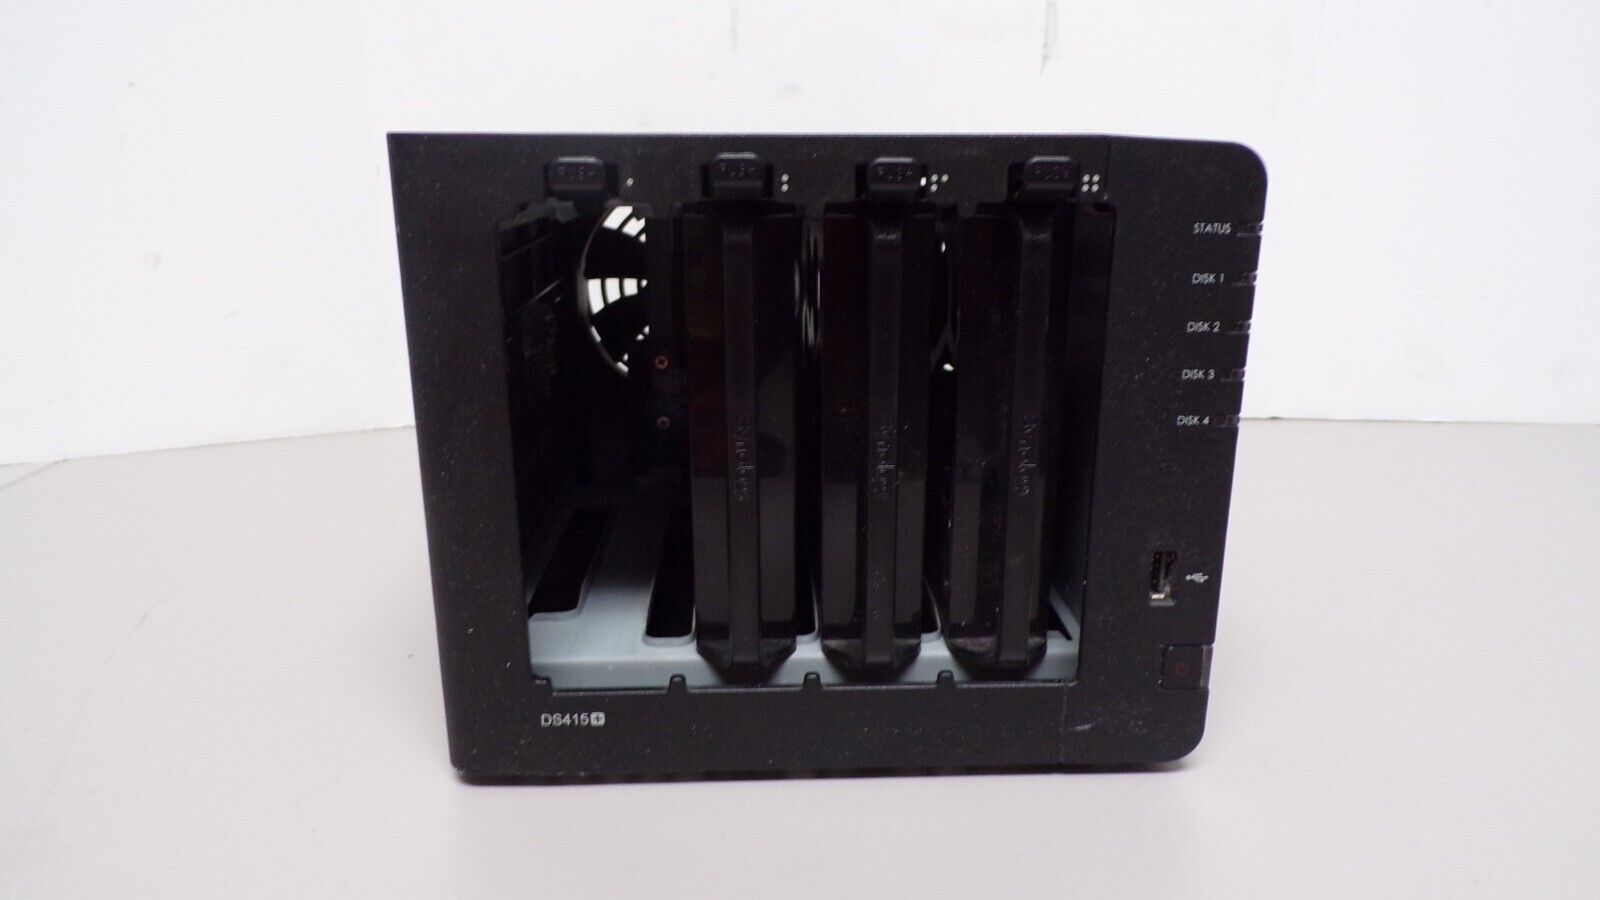 Synology Diskstation DS415+ 4-Bay Network Attached Storage - Untested